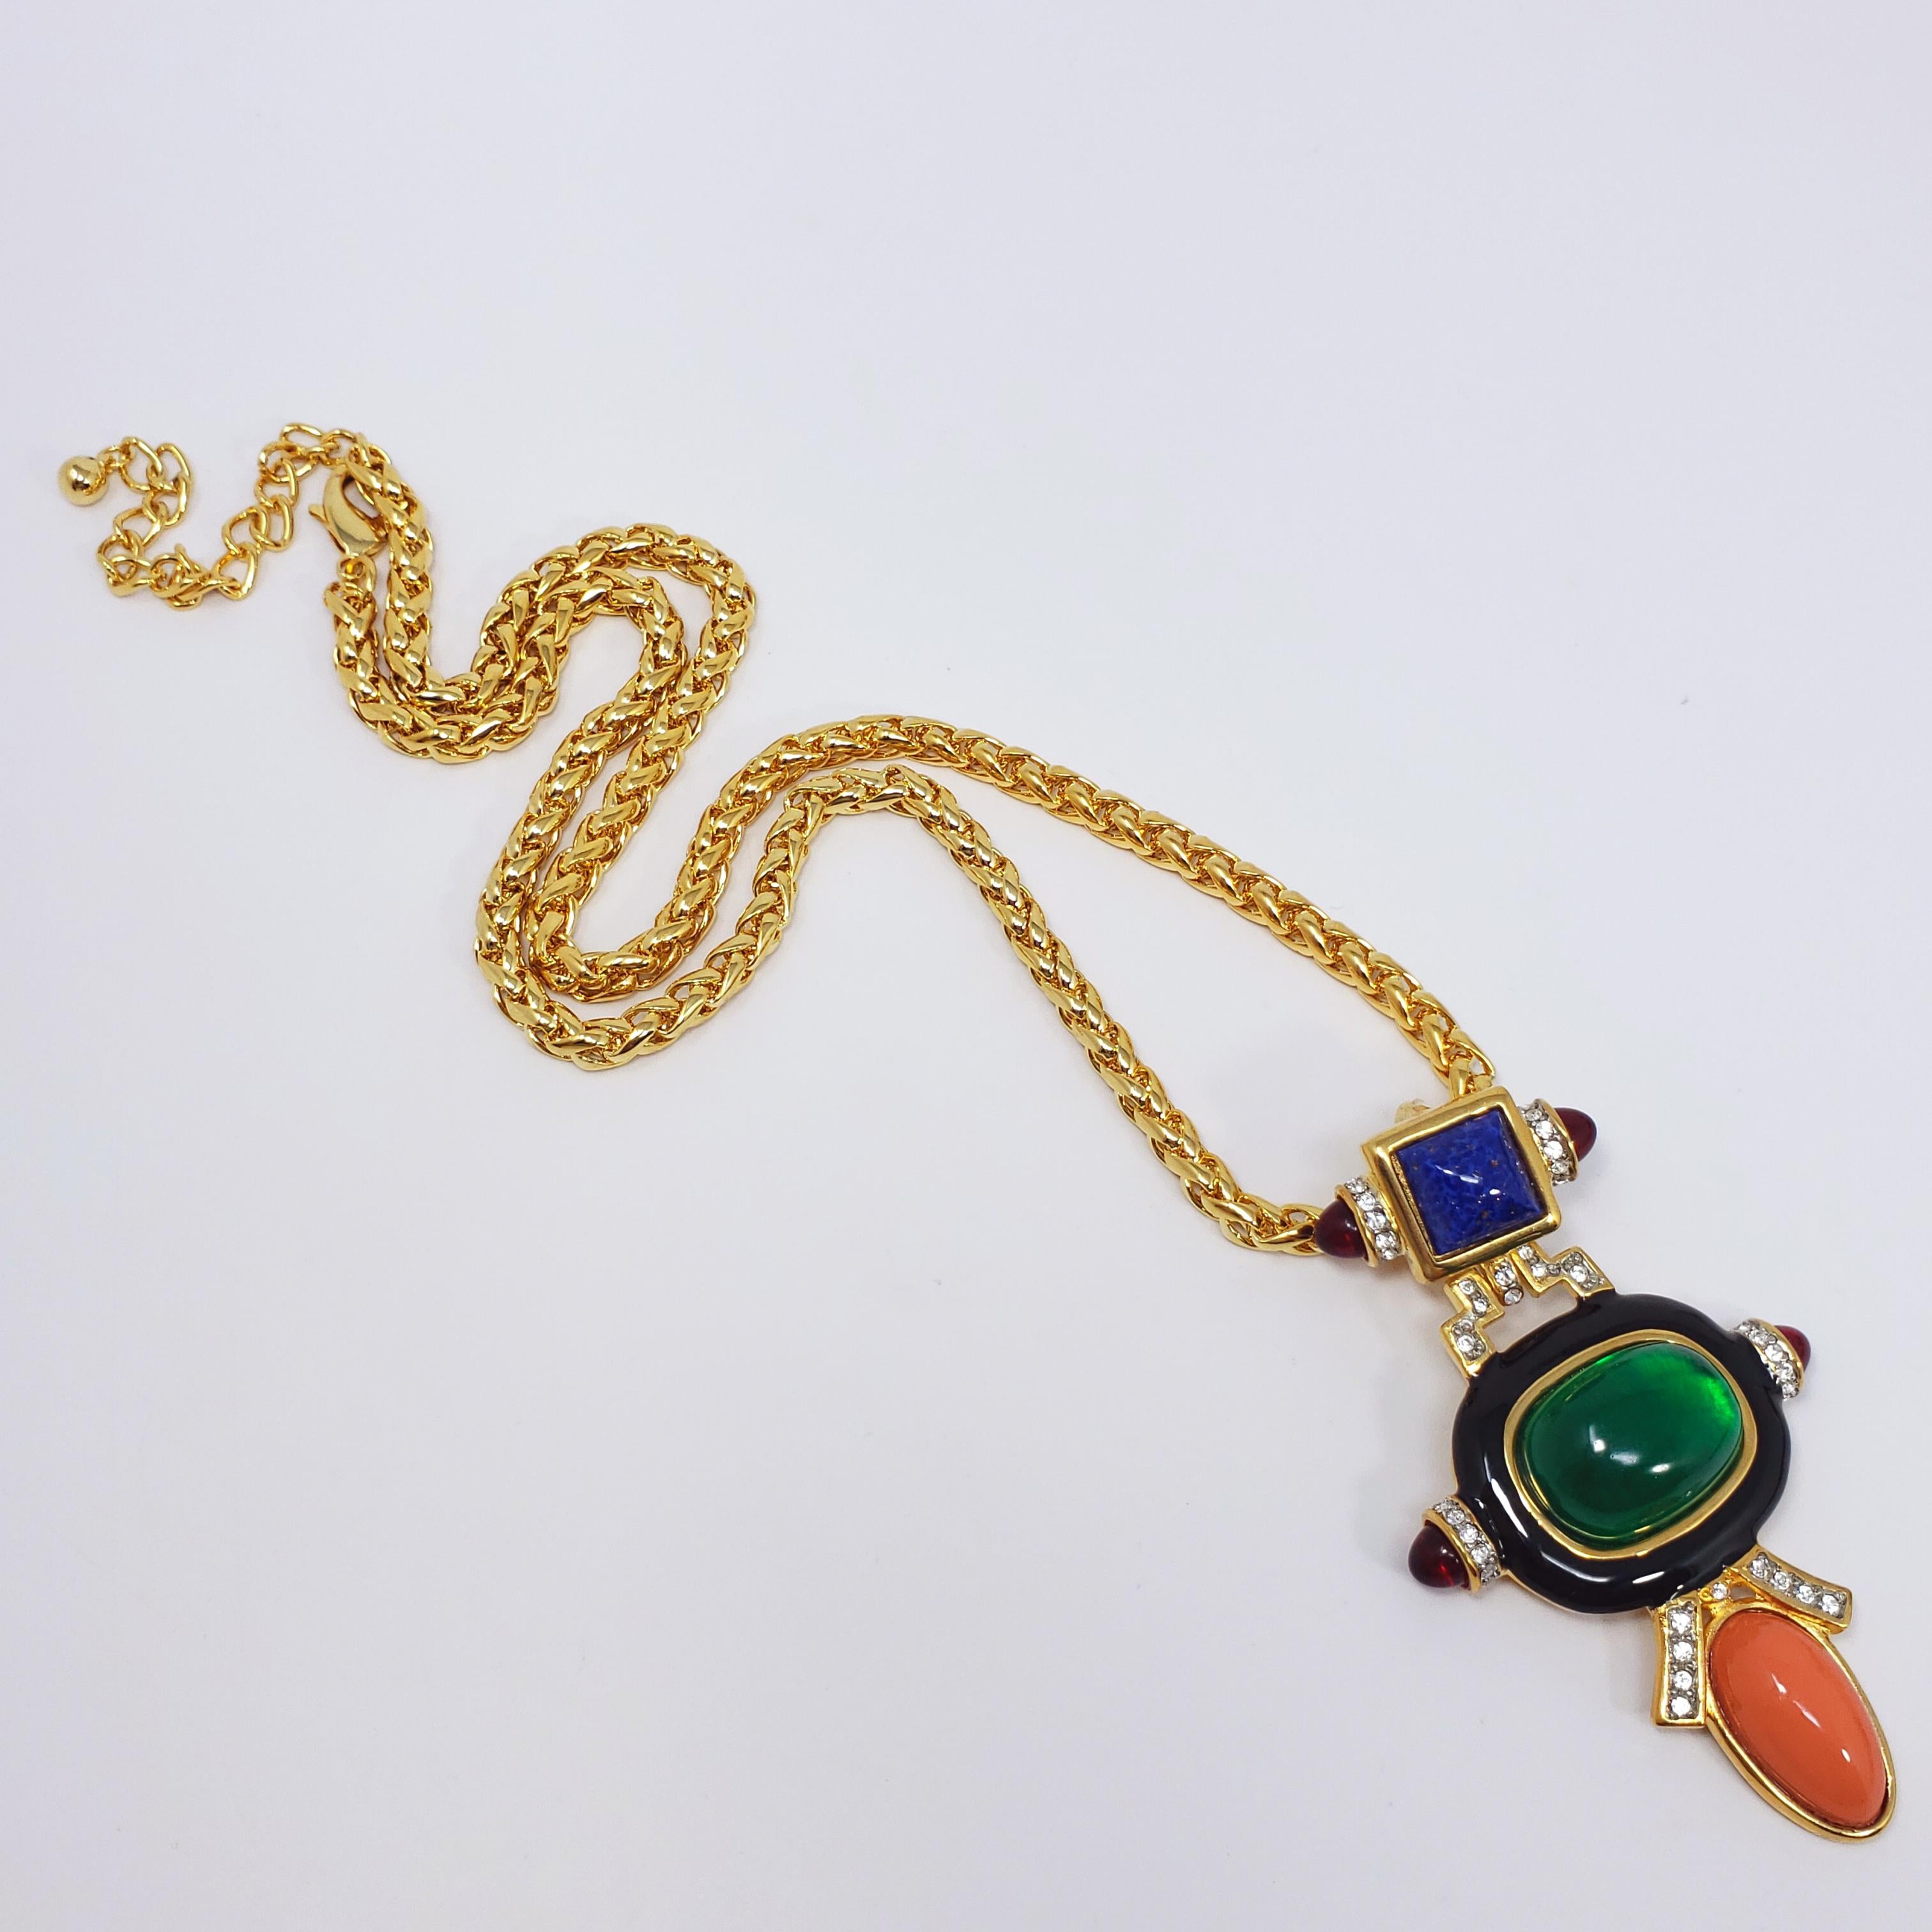 A luxurious pendant necklace from Kenneth Jay Lane's art deco line. A bold 2-piece art deco motif hangs off a thick goldtone chain, featuring faux lapis lazuli, emerald, ruby, and coral cabochons accented with black enamel and clear